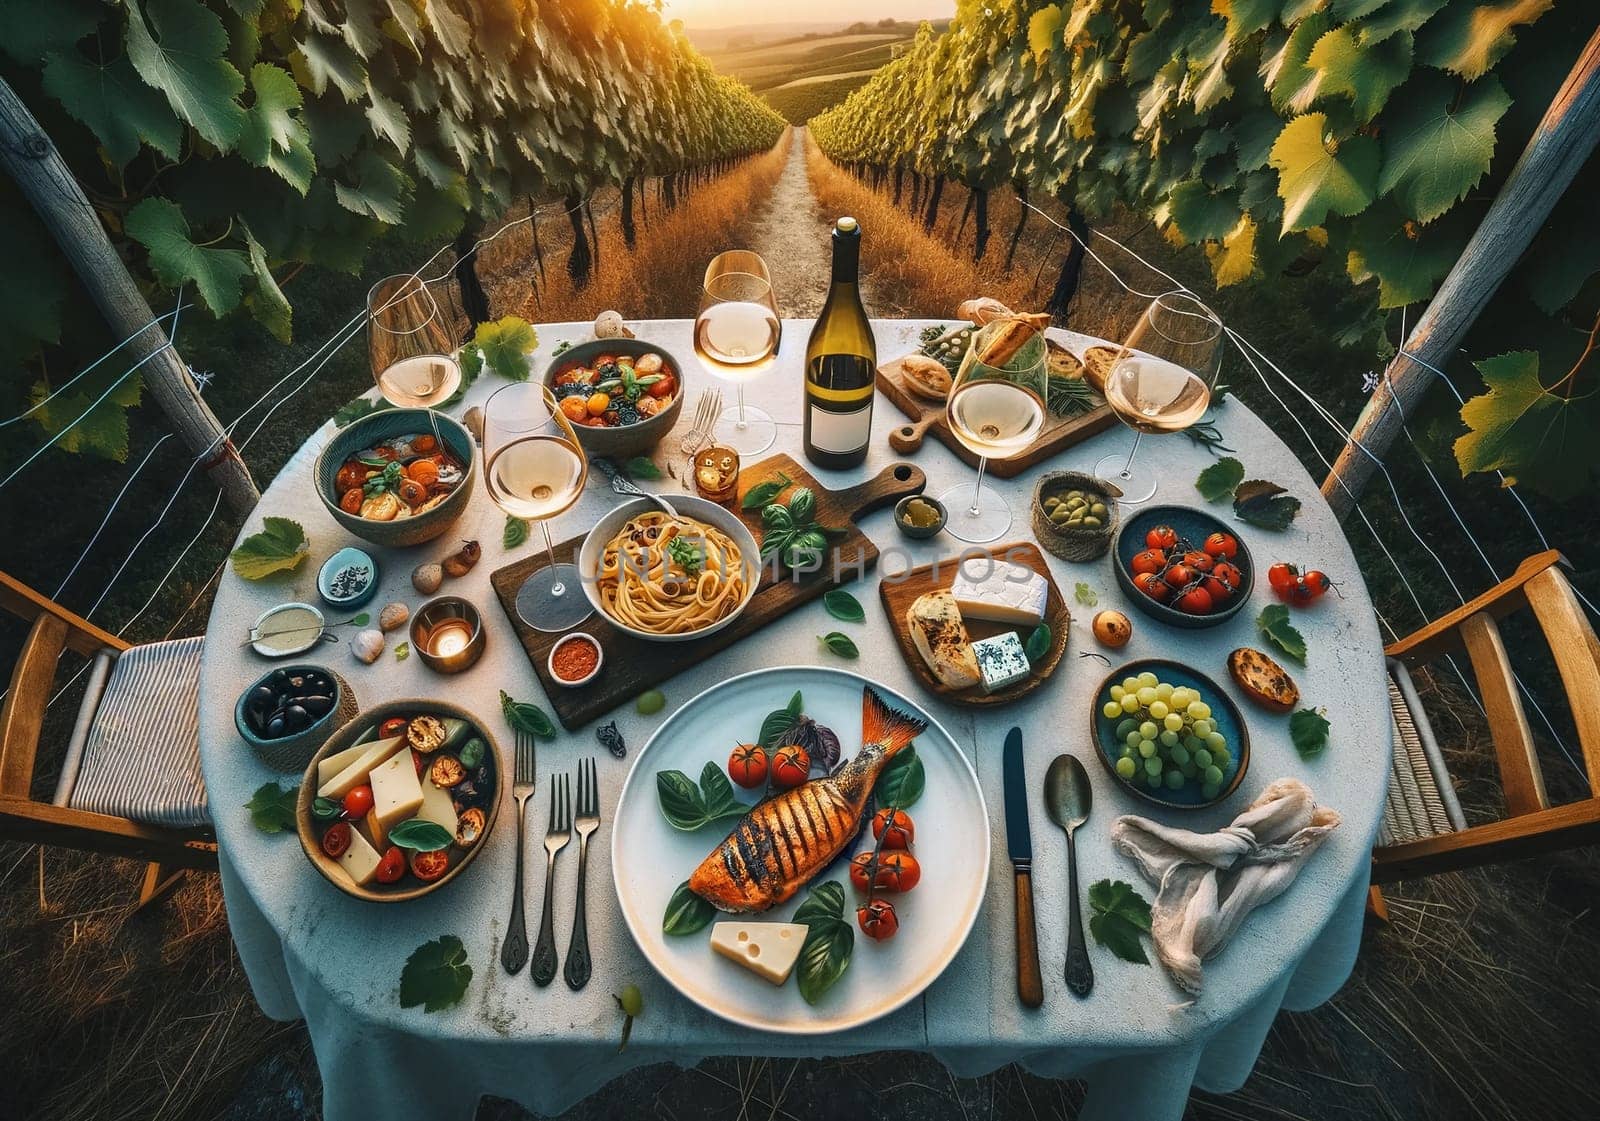 Top-down view of a summer evening dinner in a vineyard, featuring grilled fish, tomato and basil pasta, cheese and olive platter, and white wine, set during sunset. High quality illustration